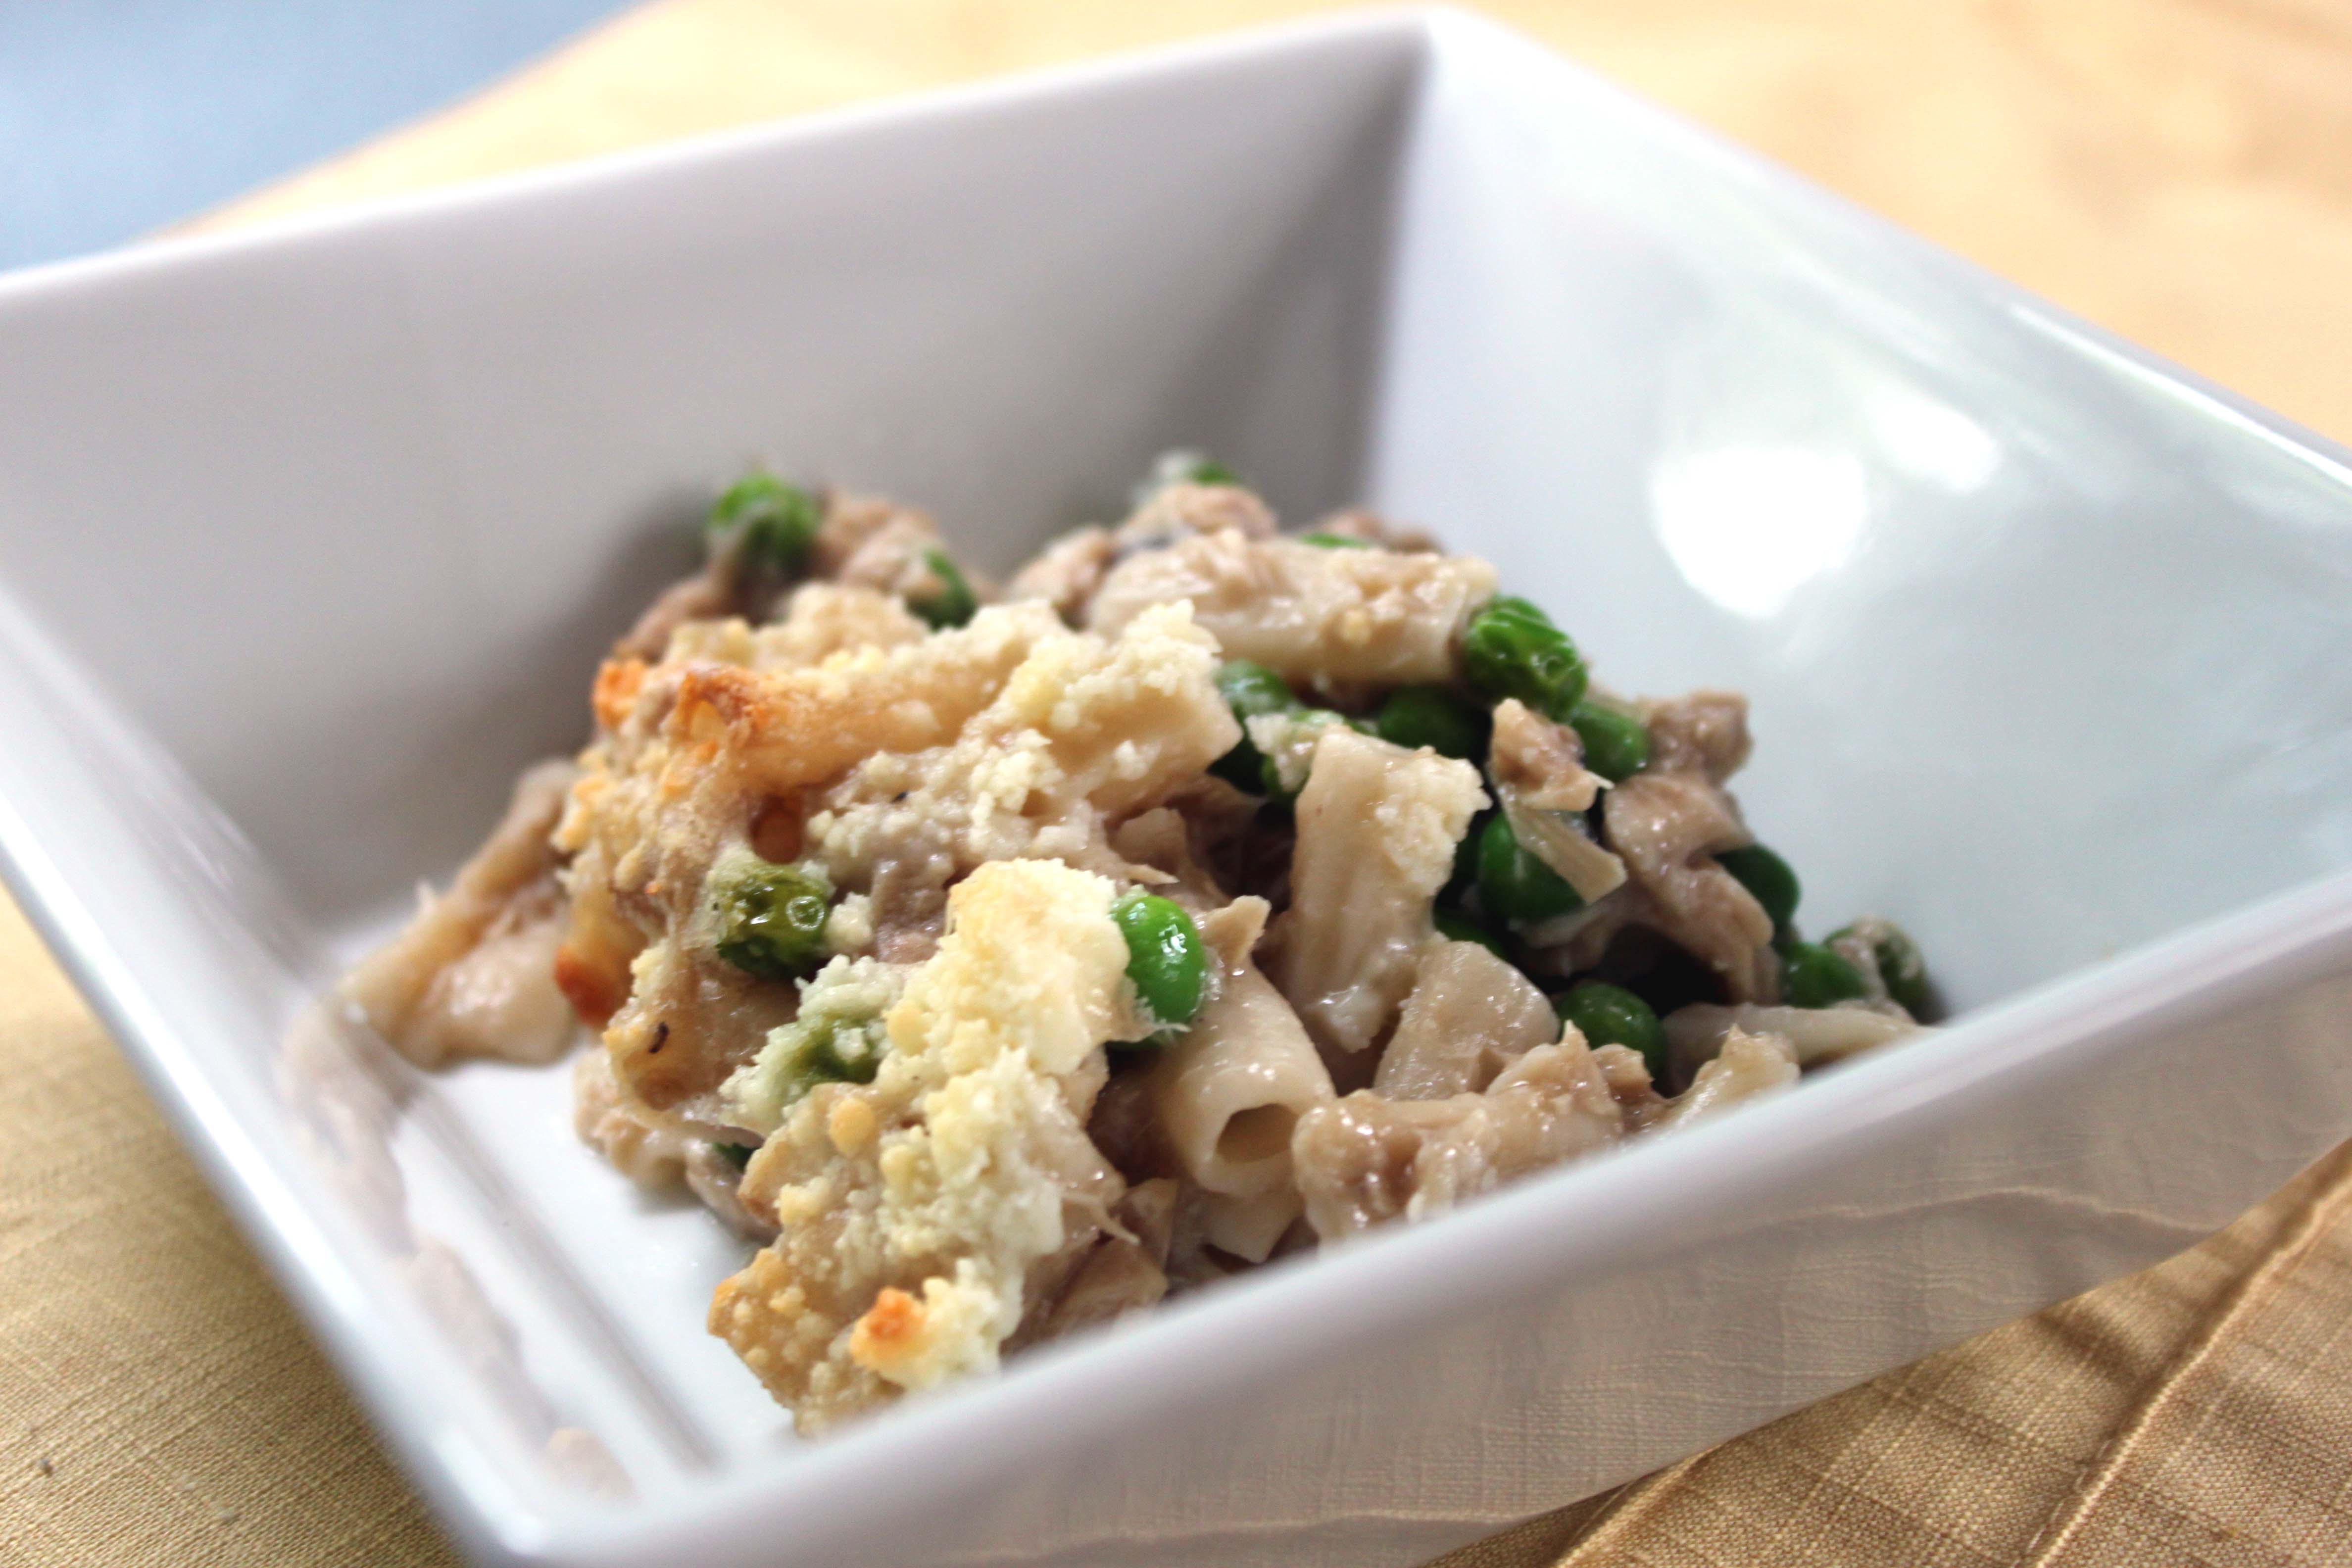 Healthy Tuna Casserole with Brown Rice Pasta | The Assembler’s Kitchen